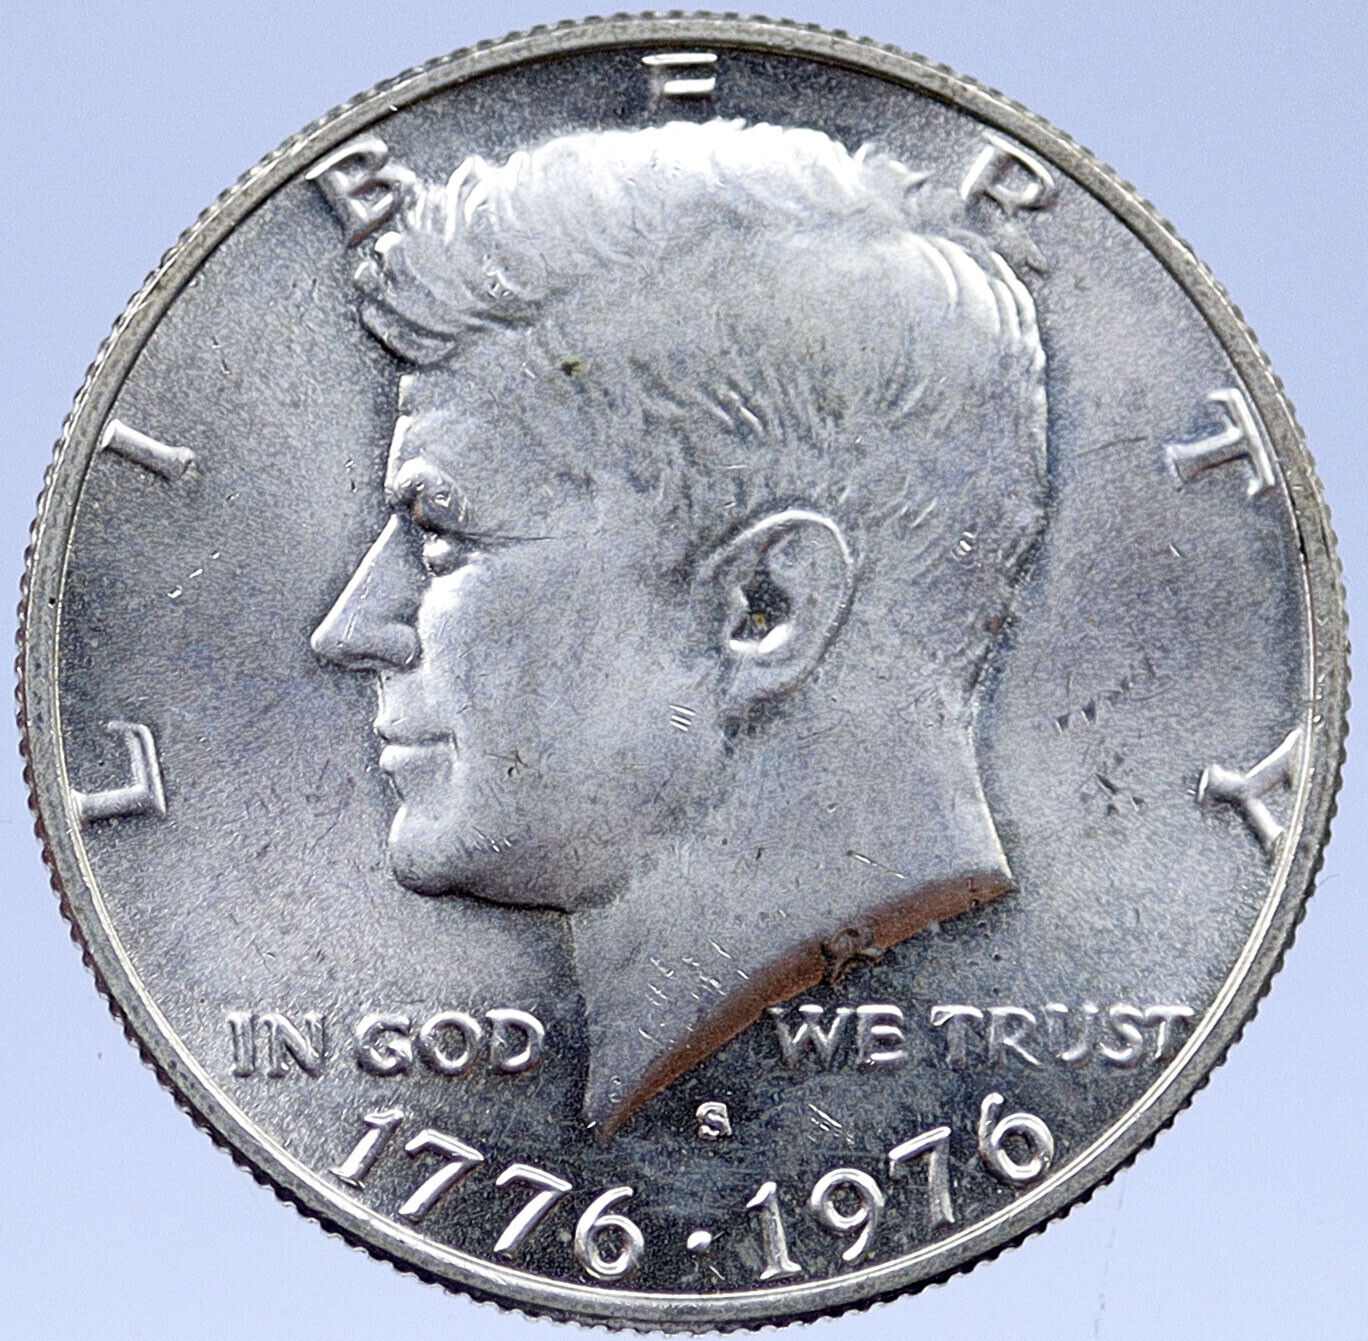 1976 S United States SILVER 50 Cents Coin JOHN F KENNEDY Bicentennial i119367